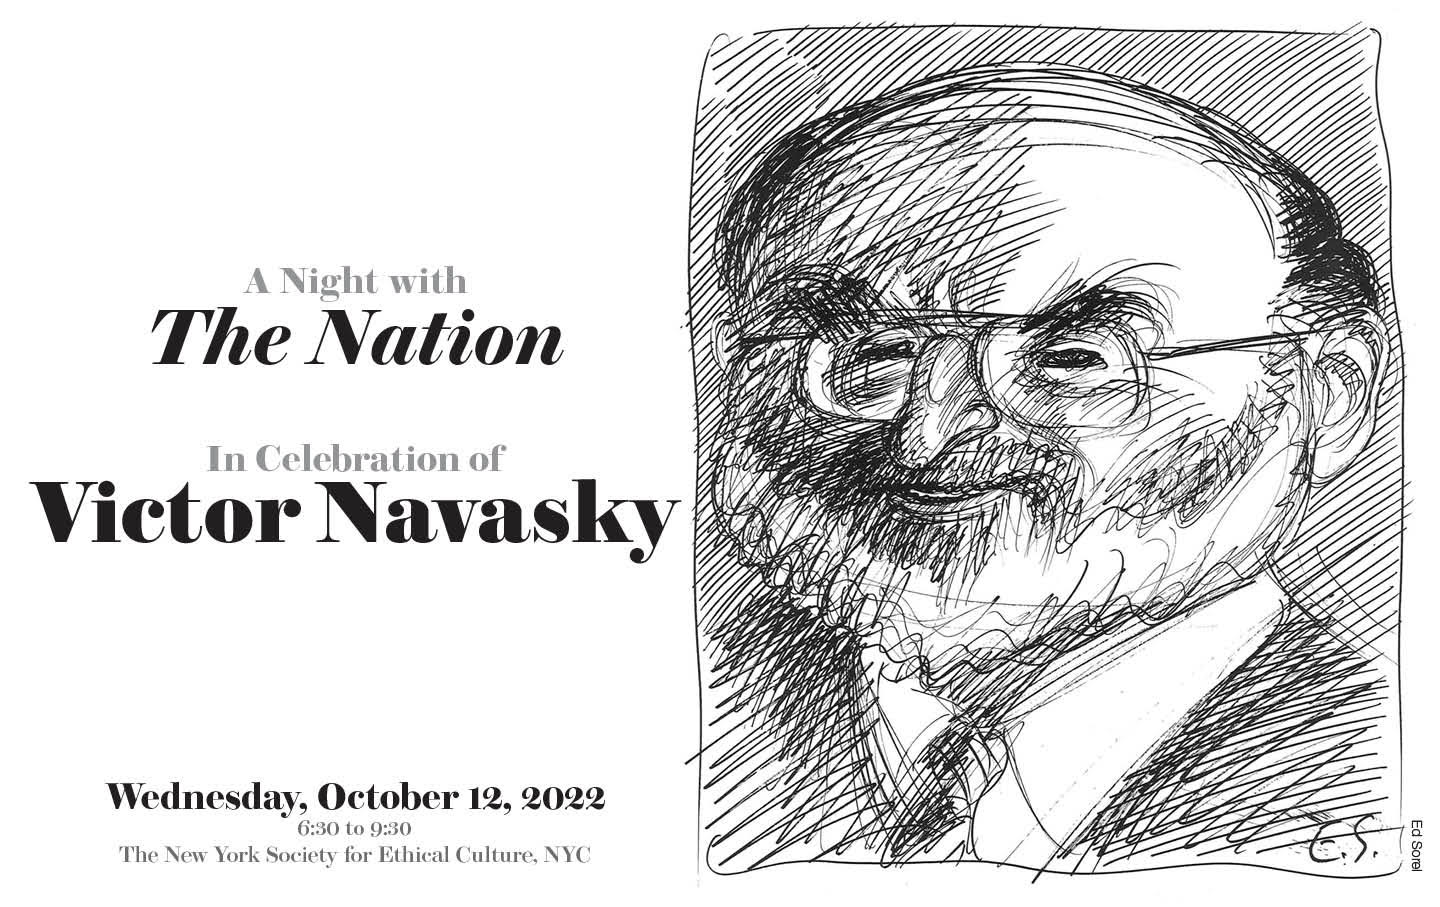 A Night with The Nation in Celebration of Victor Navasky